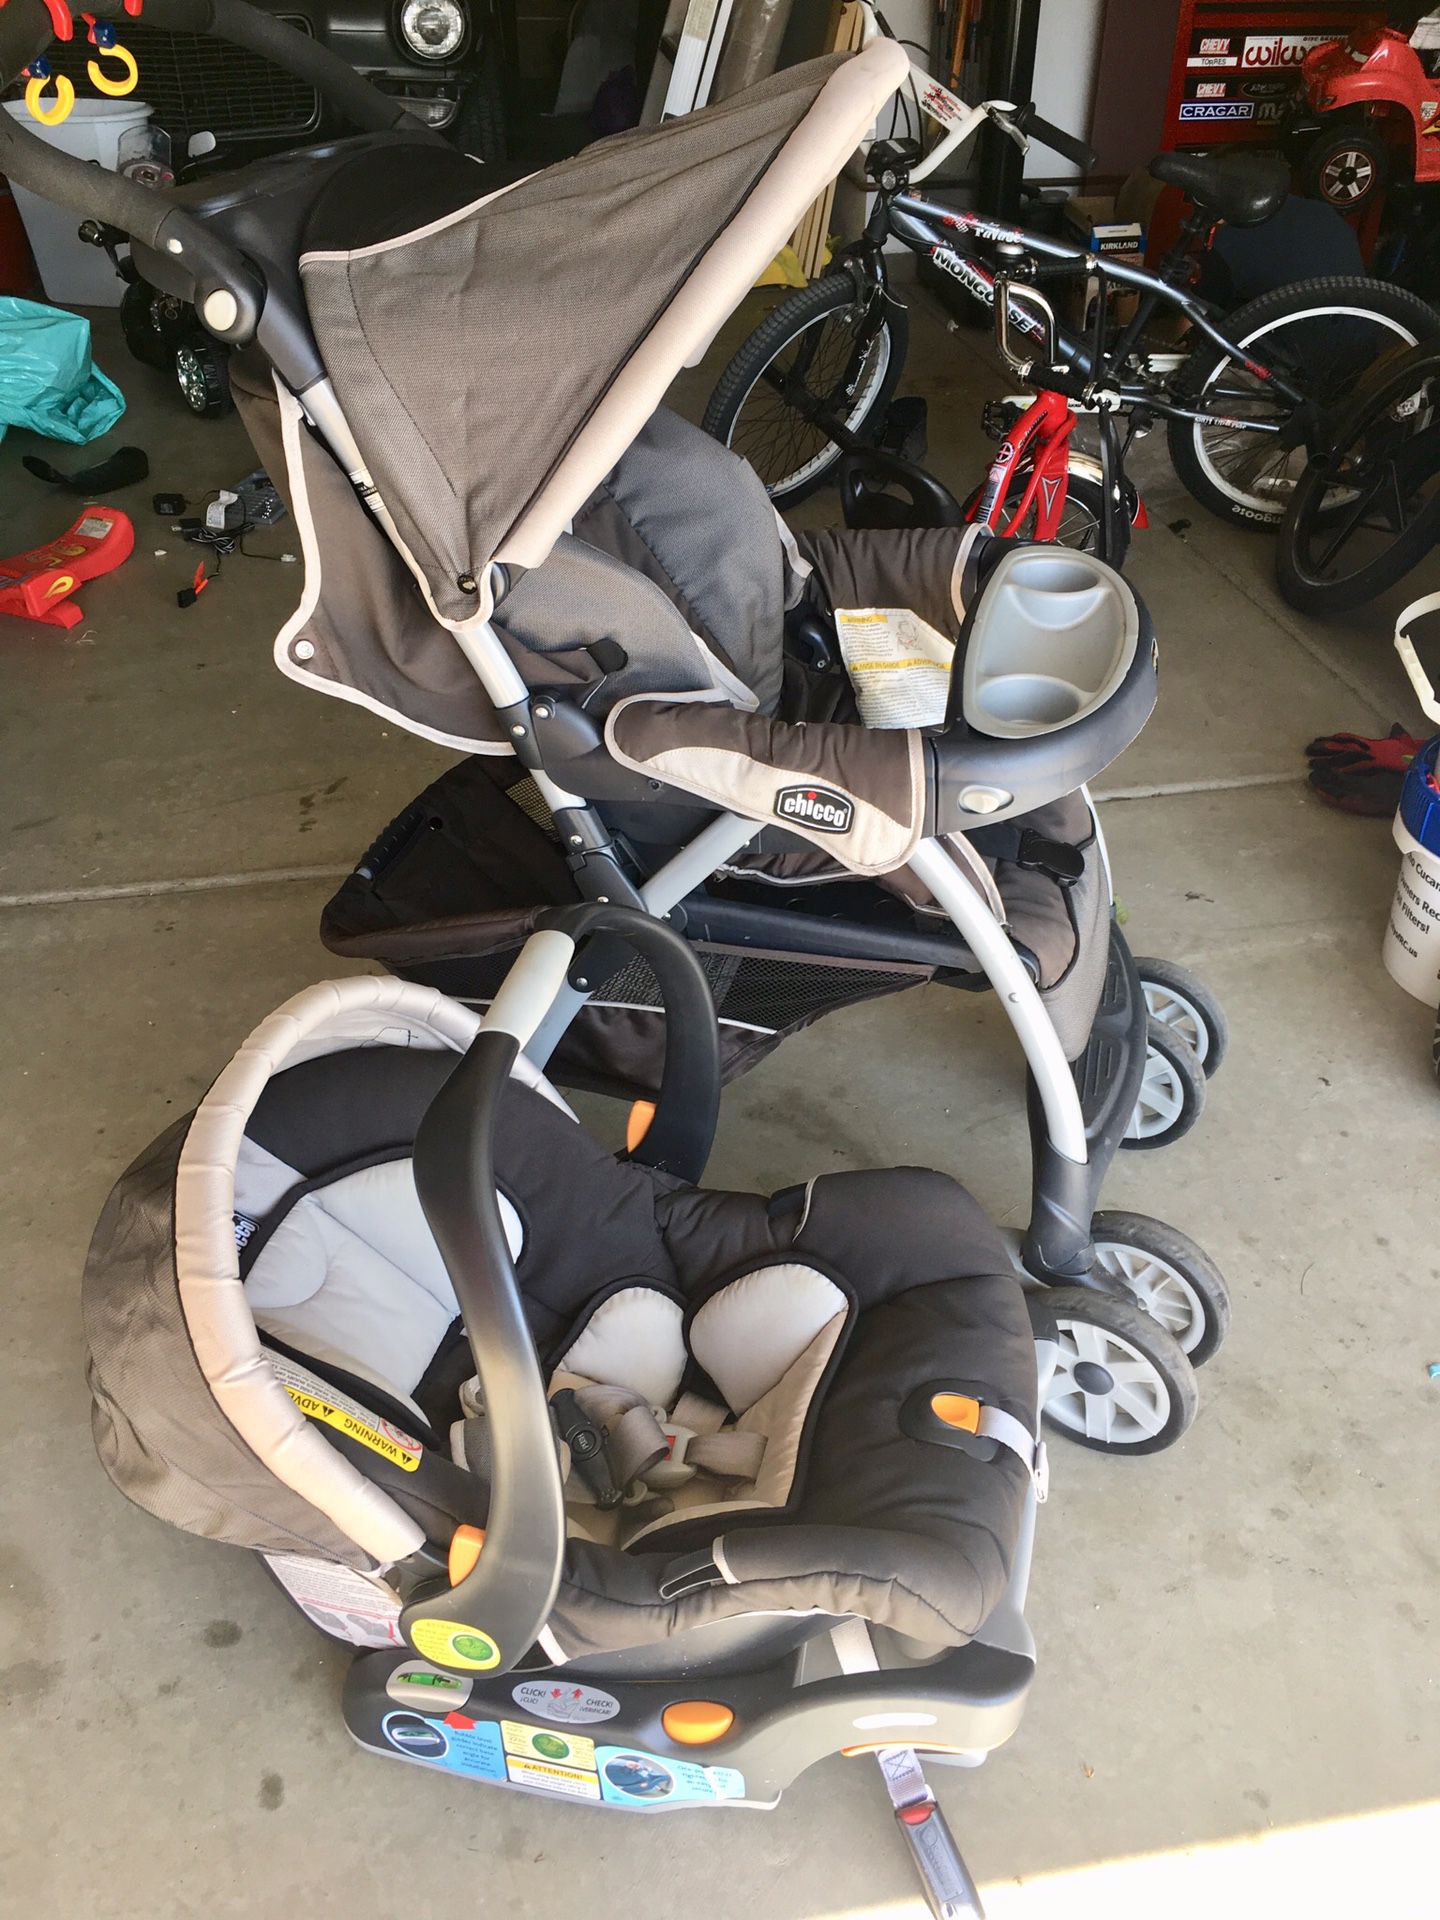 Chicco Cortina SE stroller and infant carrier